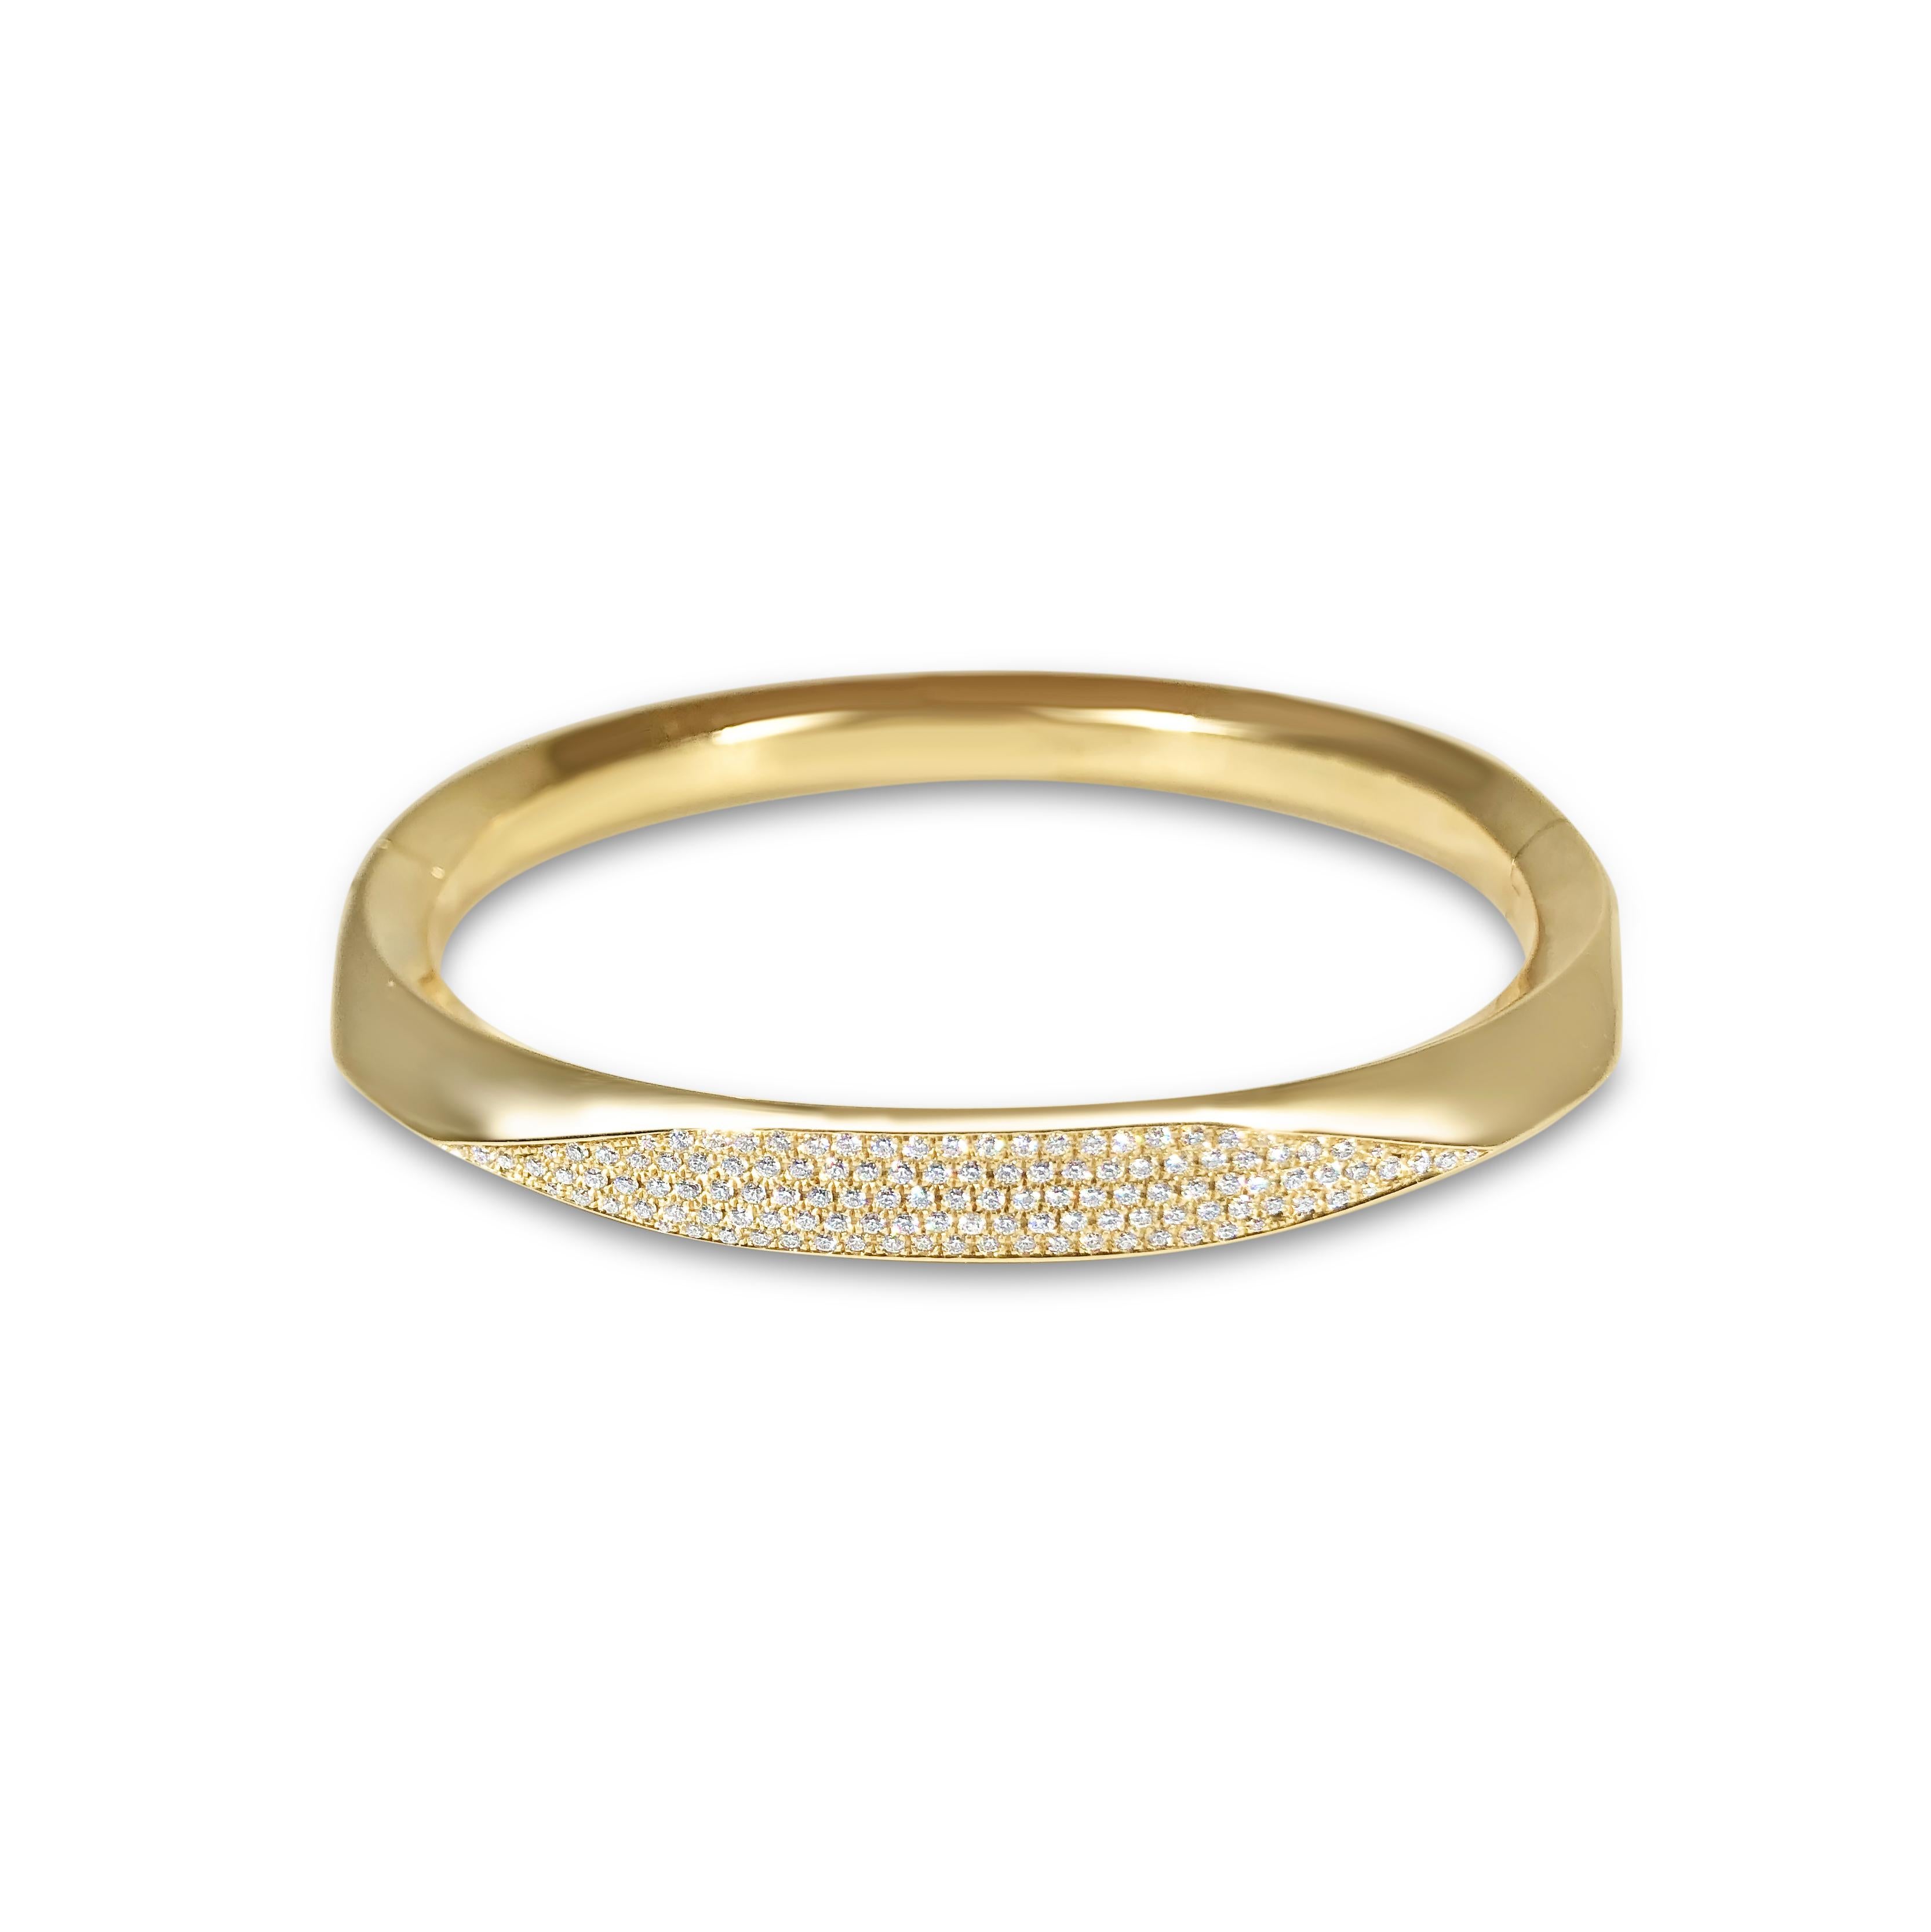 Specifications:
- 18kt Yellow Gold
- Handcrafted in Switzerland
- Customization, made-to-order available in precious stone type, precious metal type, and size 
 (prices may vary)
- Style #: 1614 D BR.0.84

All items on the site are in stock and